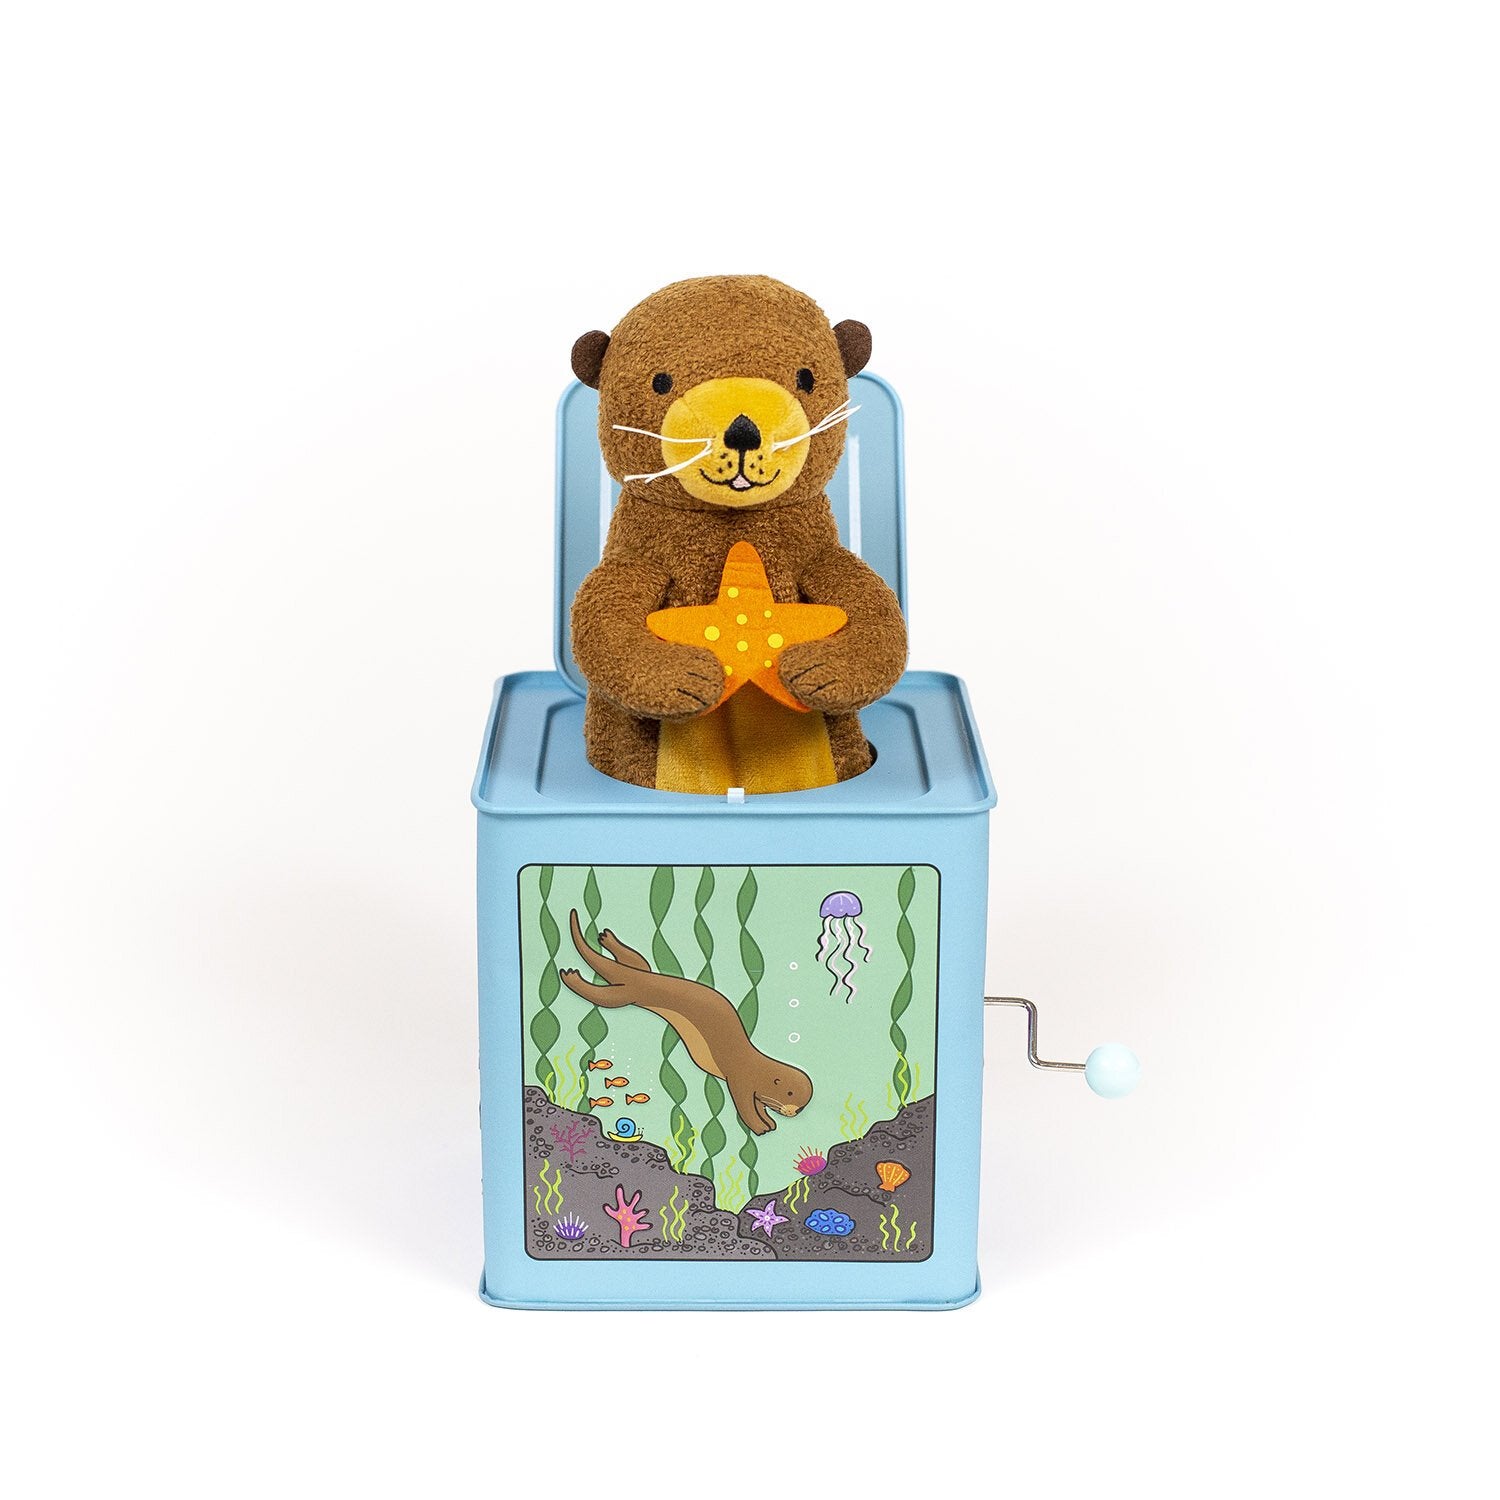 Otter Jack-in-the-Box - TREEHOUSE kid and craft